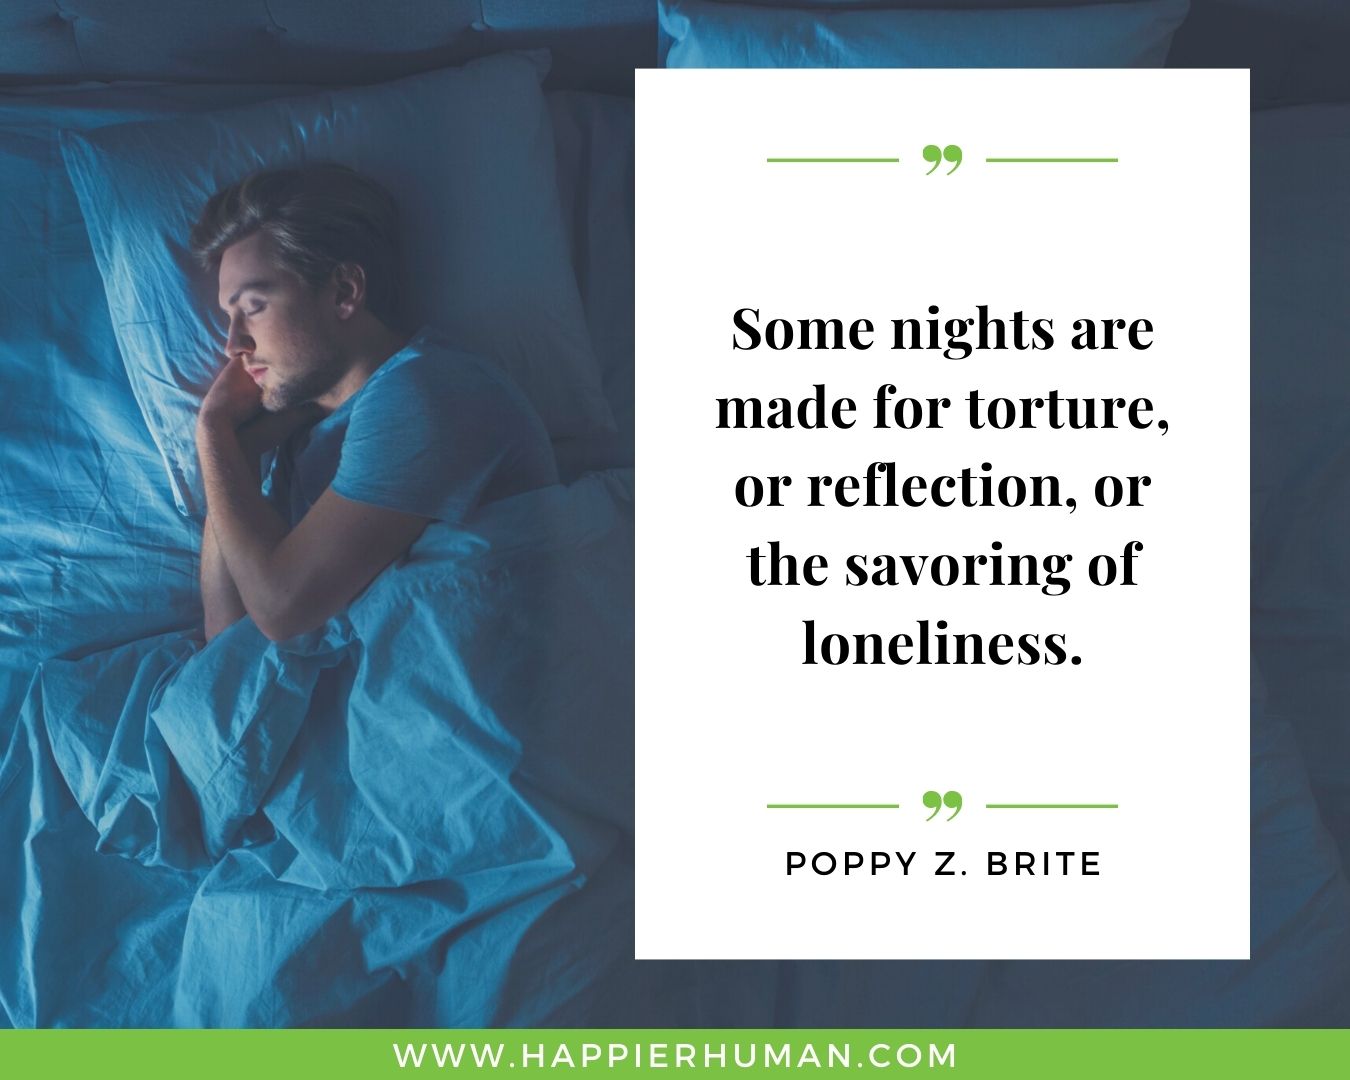 Loneliness Quotes - “Some nights are made for torture, or reflection, or the savoring of loneliness.”– Poppy Z. Brite